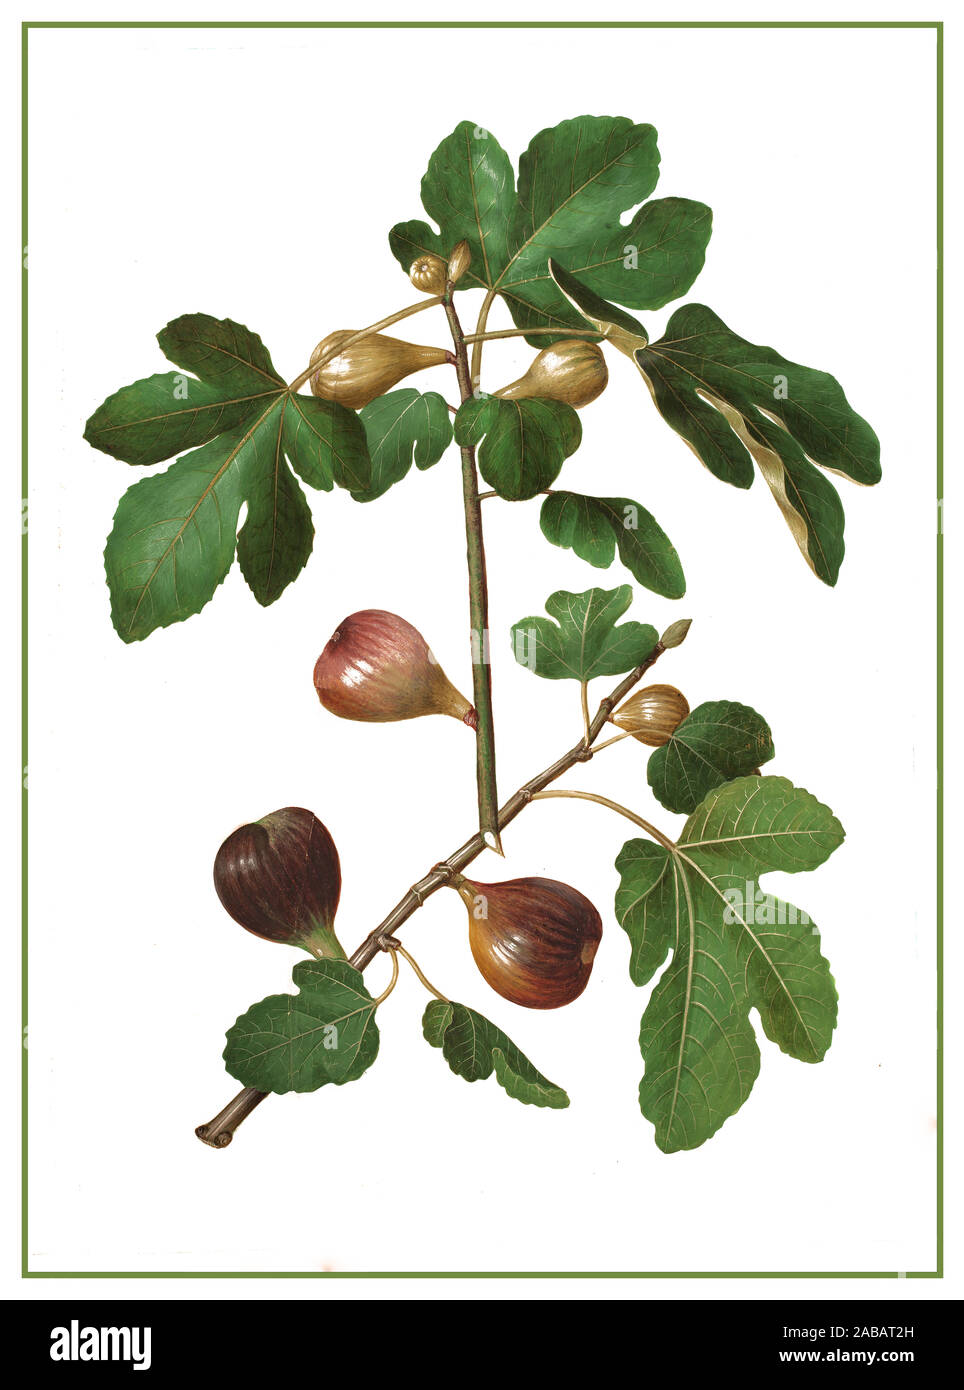 FIG Ficus carica Vintage Poster Lithograph Ficus carica Common Fig Figs - circa 1659 by Johannes Simon Holtzbecher Ficus carica an Asian species of flowering plant in the mulberry family, known as the common fig. Stock Photo